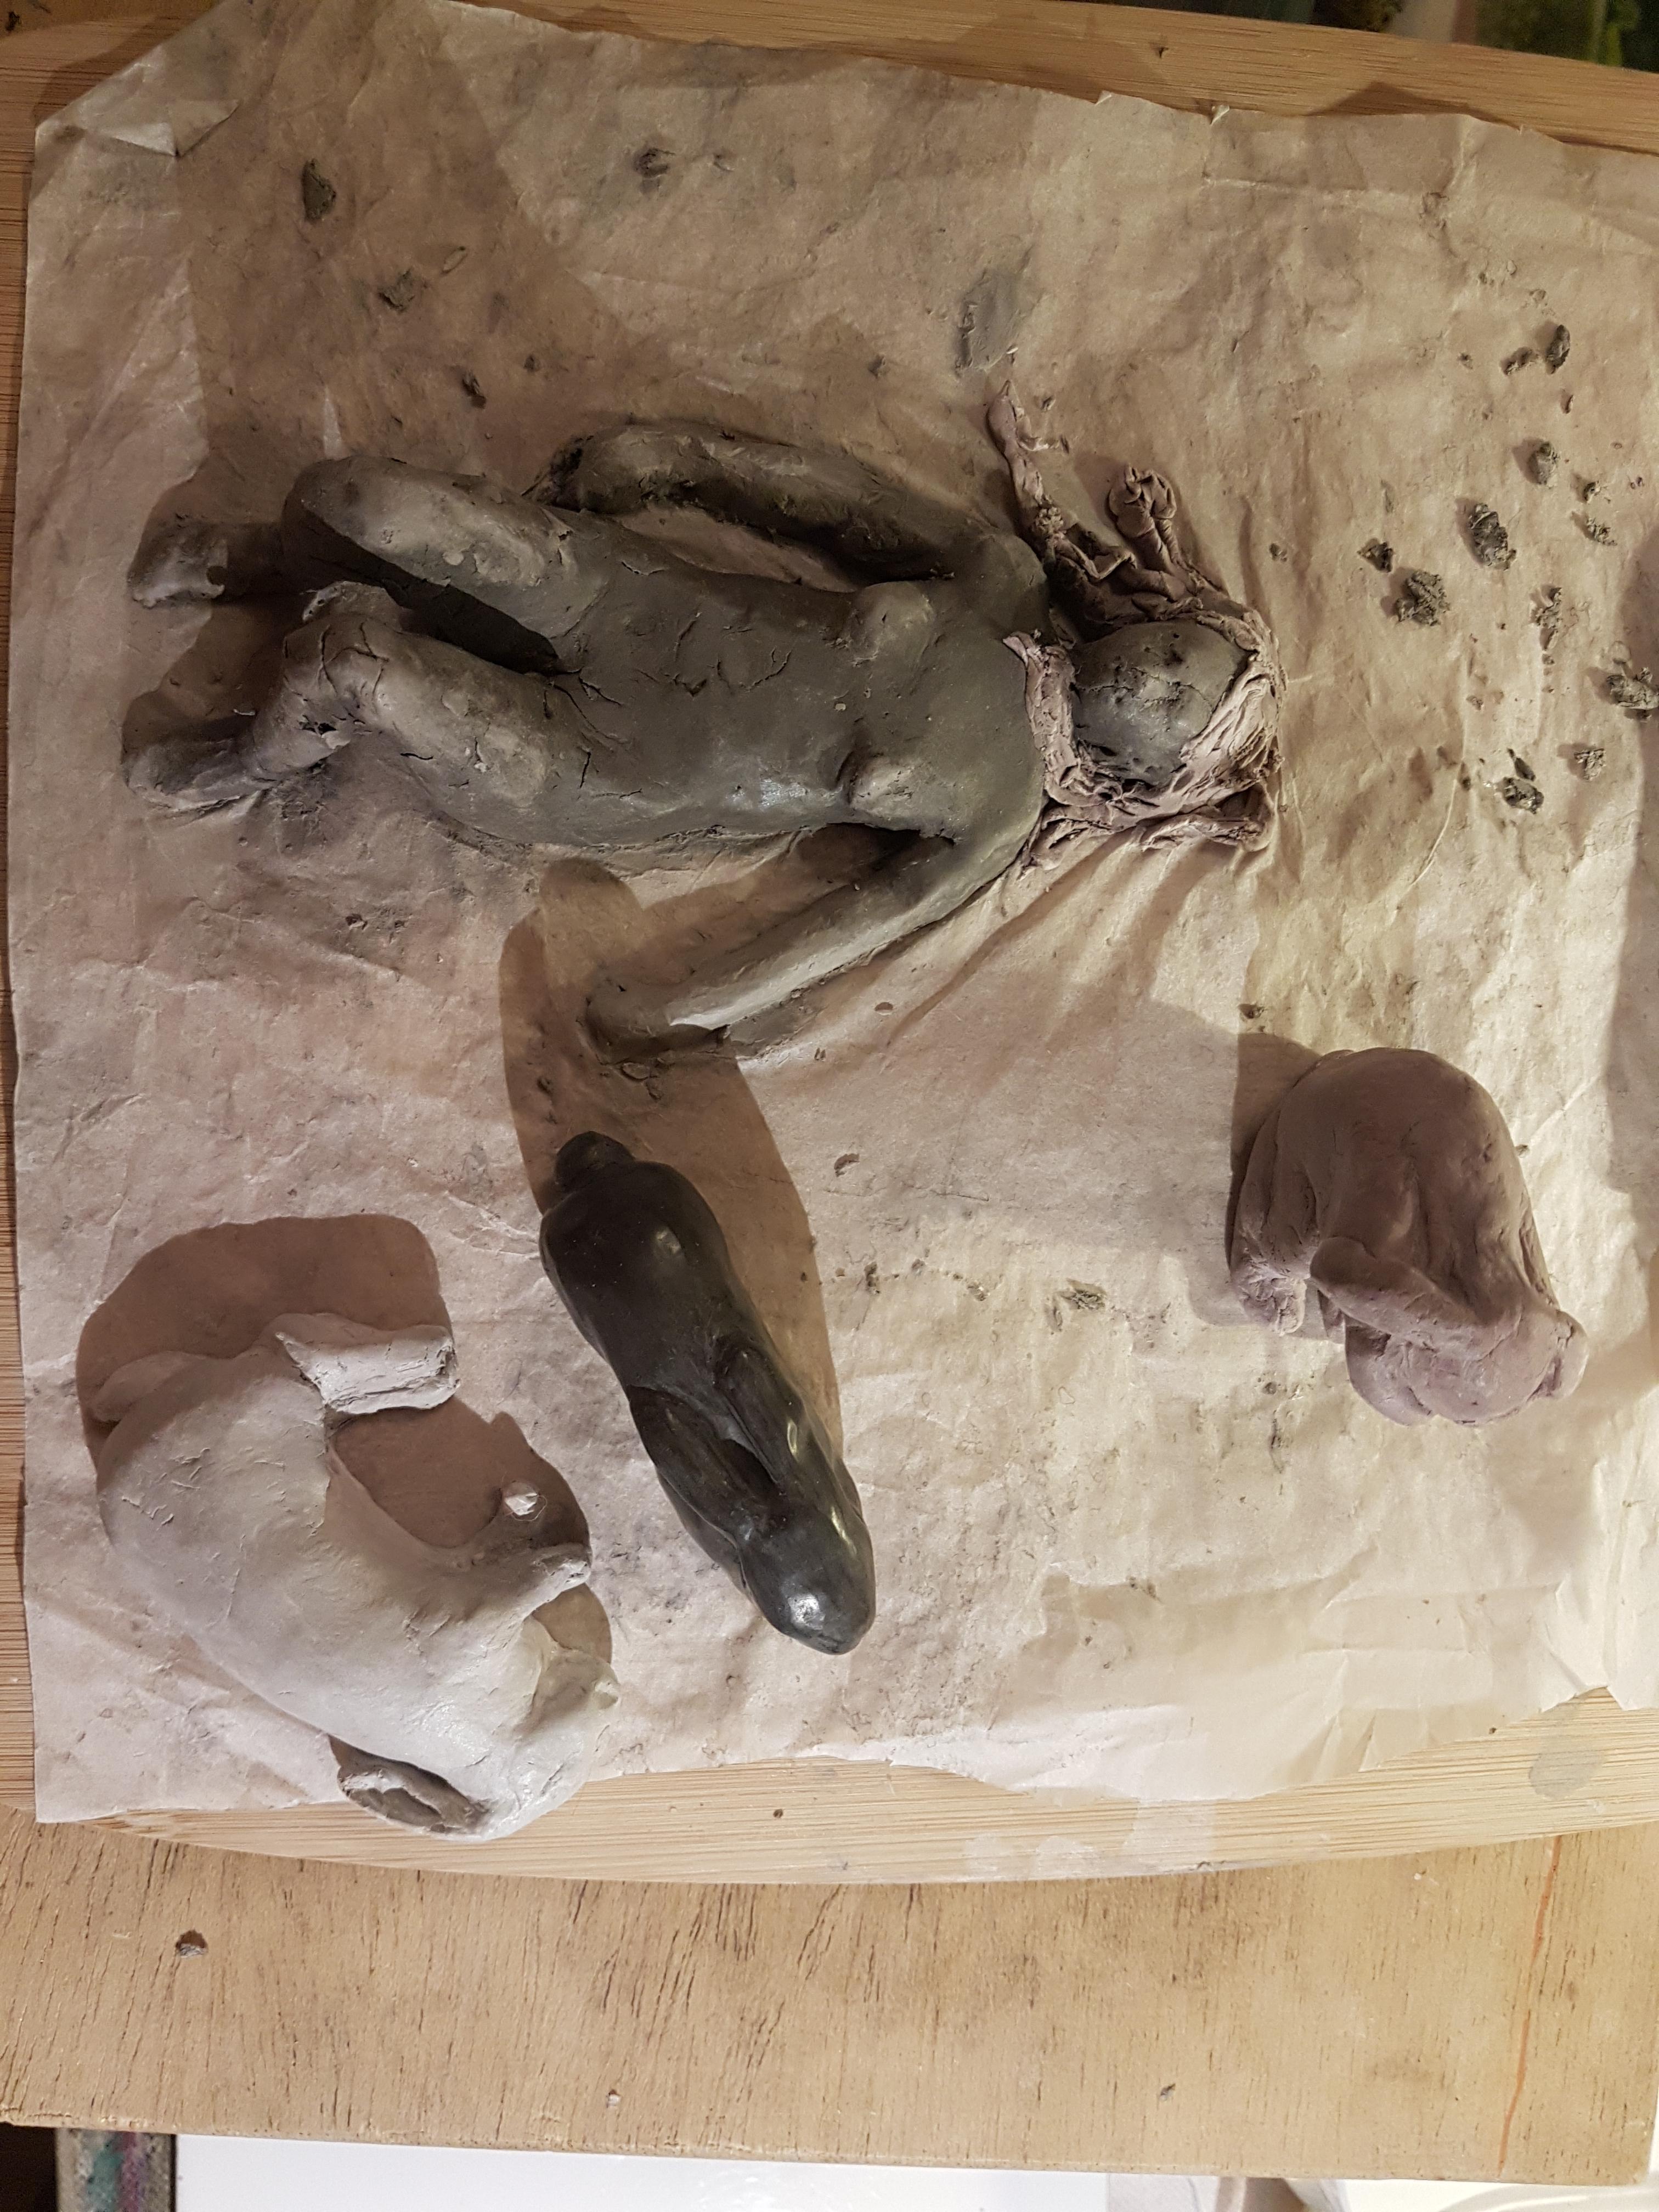 Air drying clay sculptures - WetCanvas: Online Living for Artists